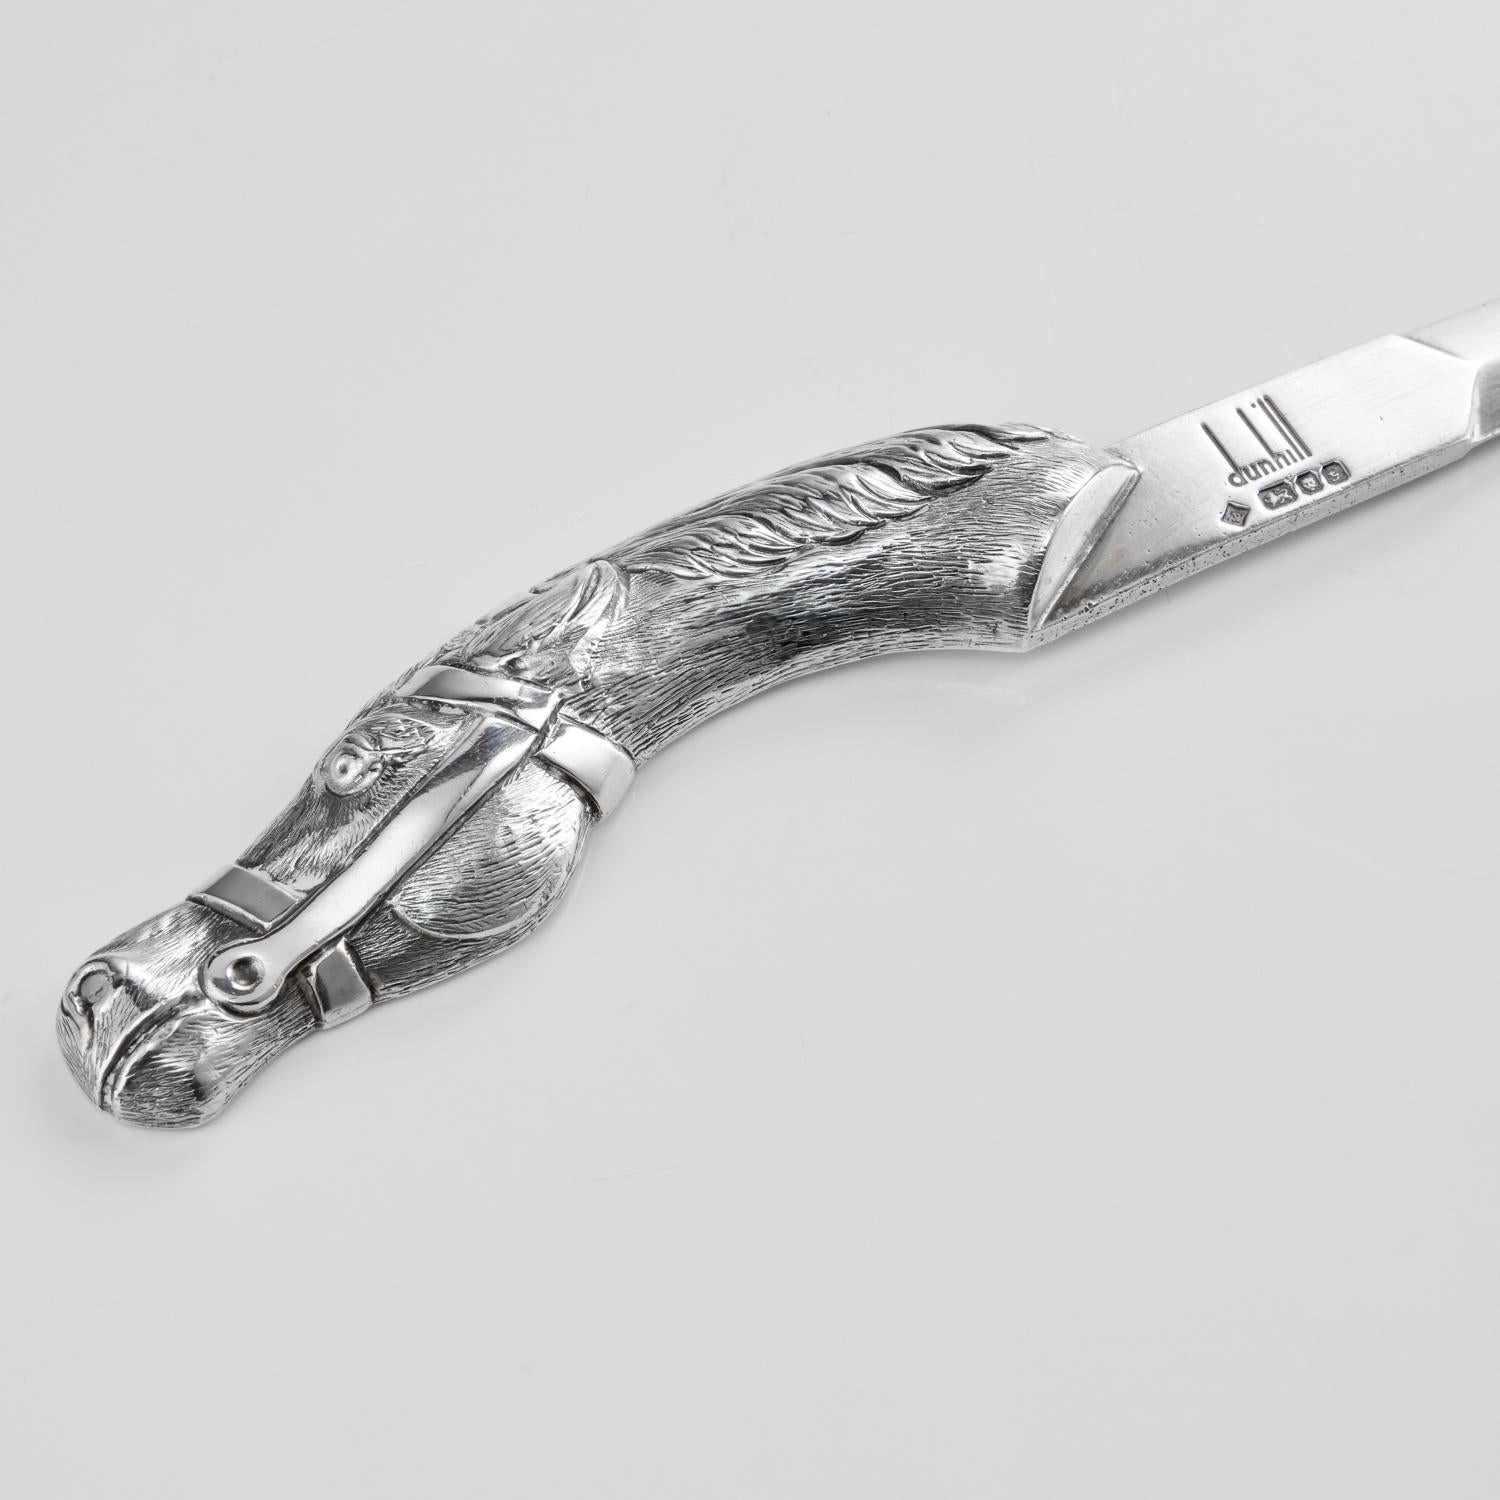 An impressive quality Silver Dunhill letter opener with an intricately carved horses head on one end. The shape of the horse head is curved wonderfully which can create a handle shape.

The piece is signed & dated on the upper side - London,